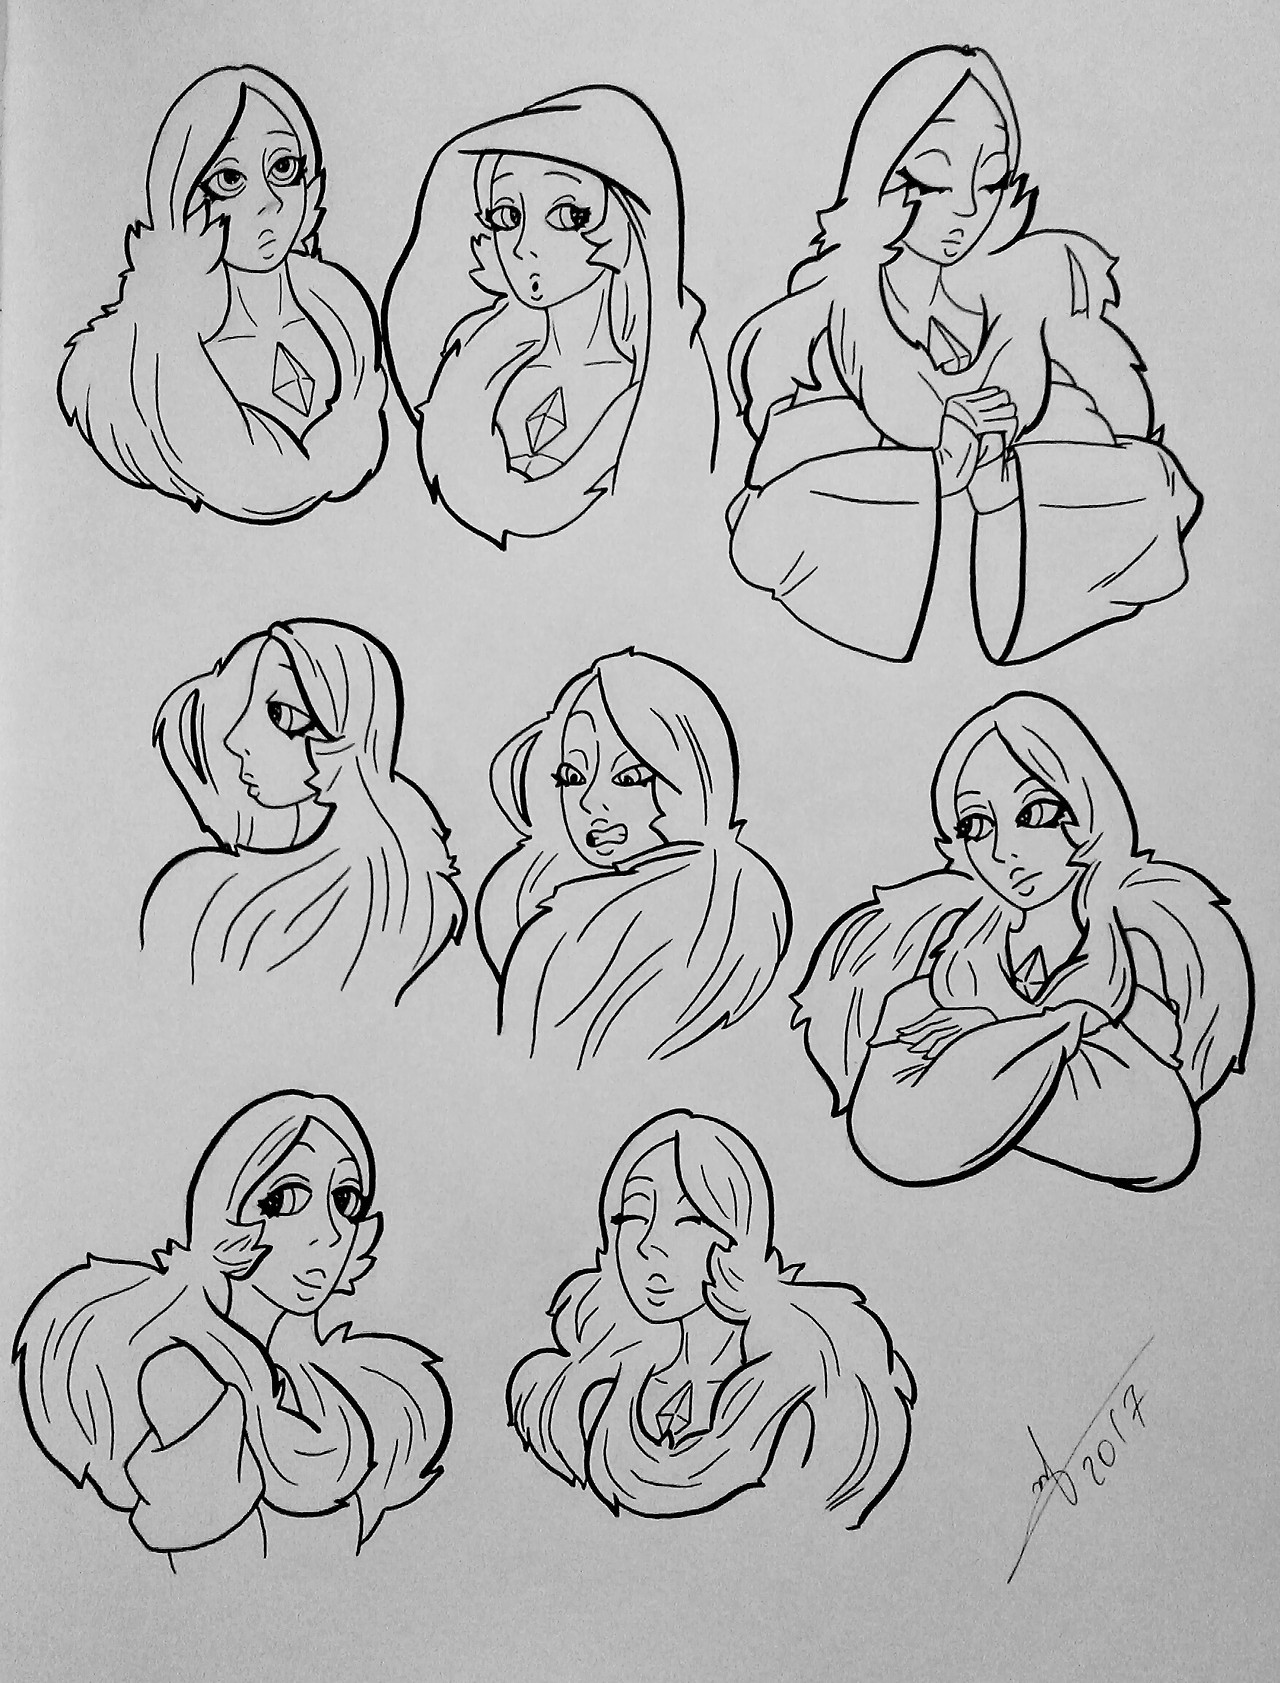 Maybe some Blue Diamond doodles